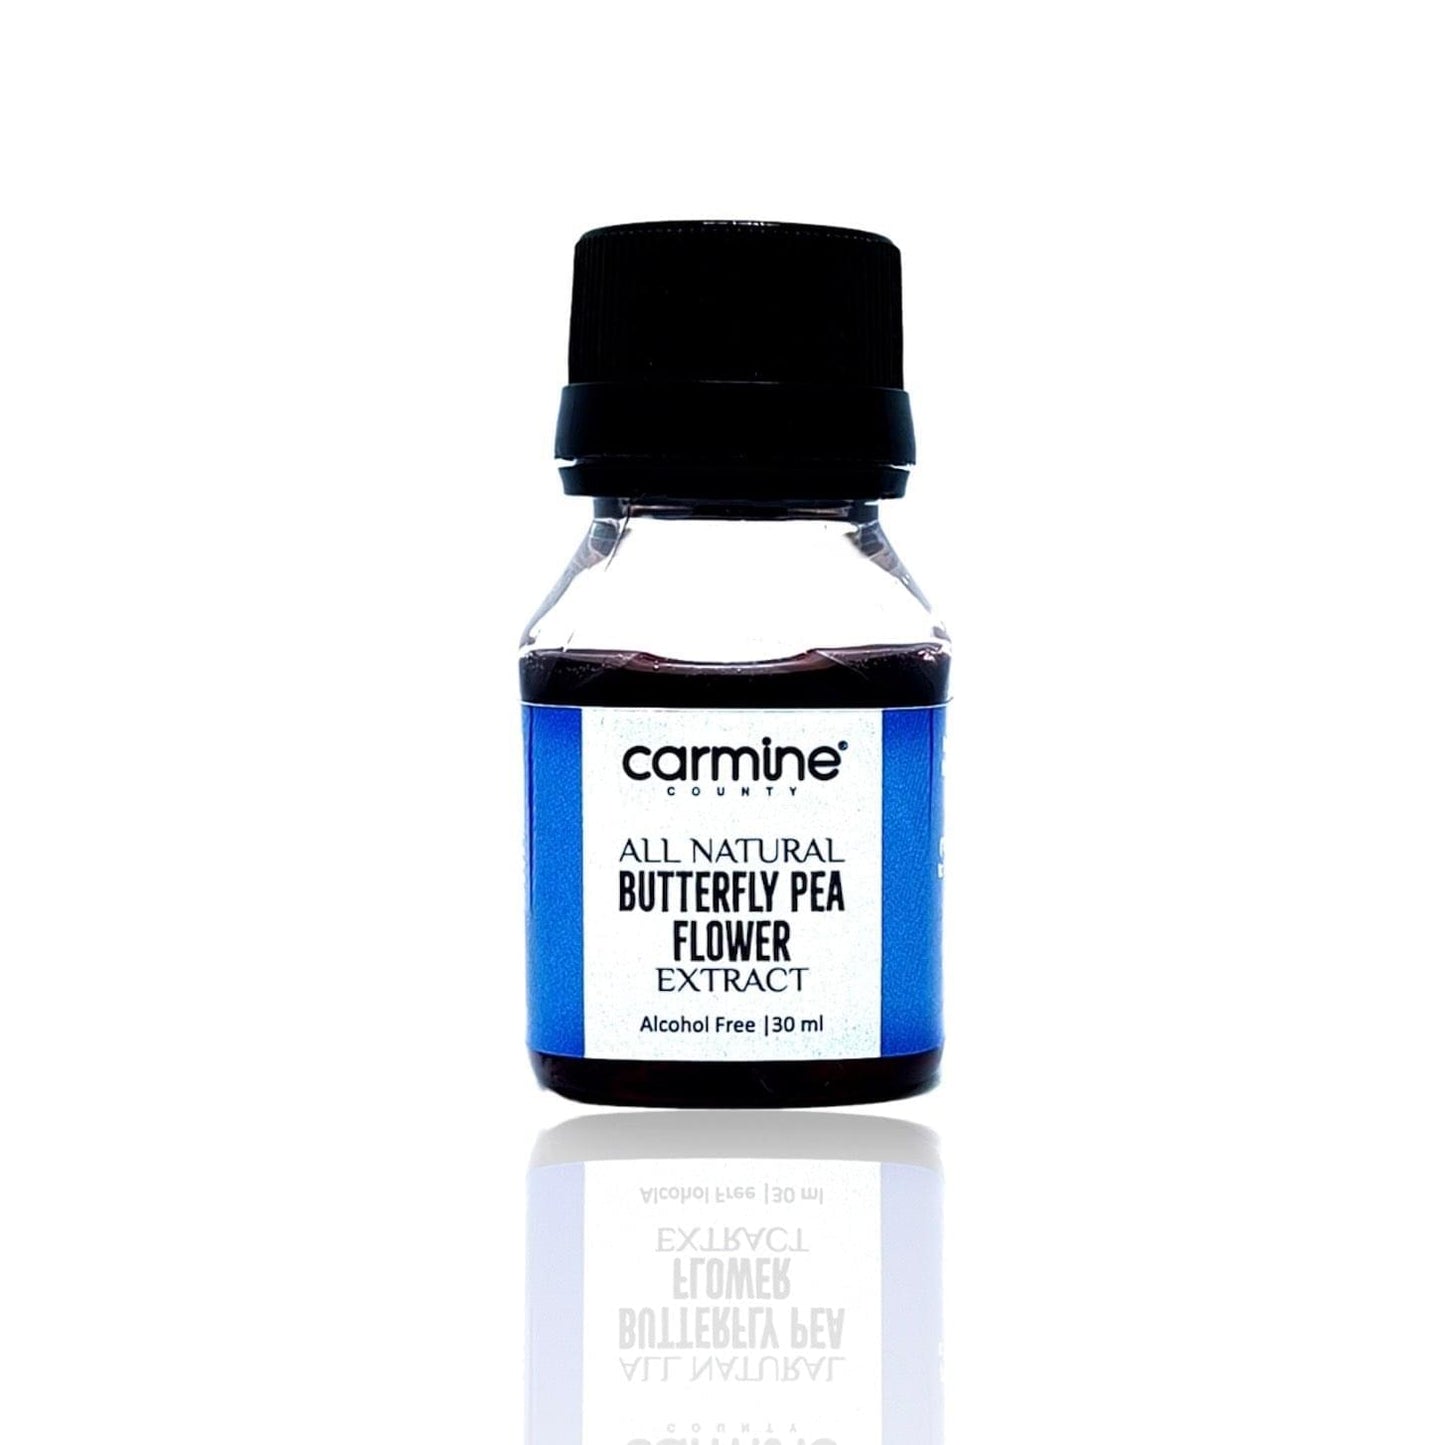 Carmine County All Natural Butterfly Pea Flower Extract 30 ml